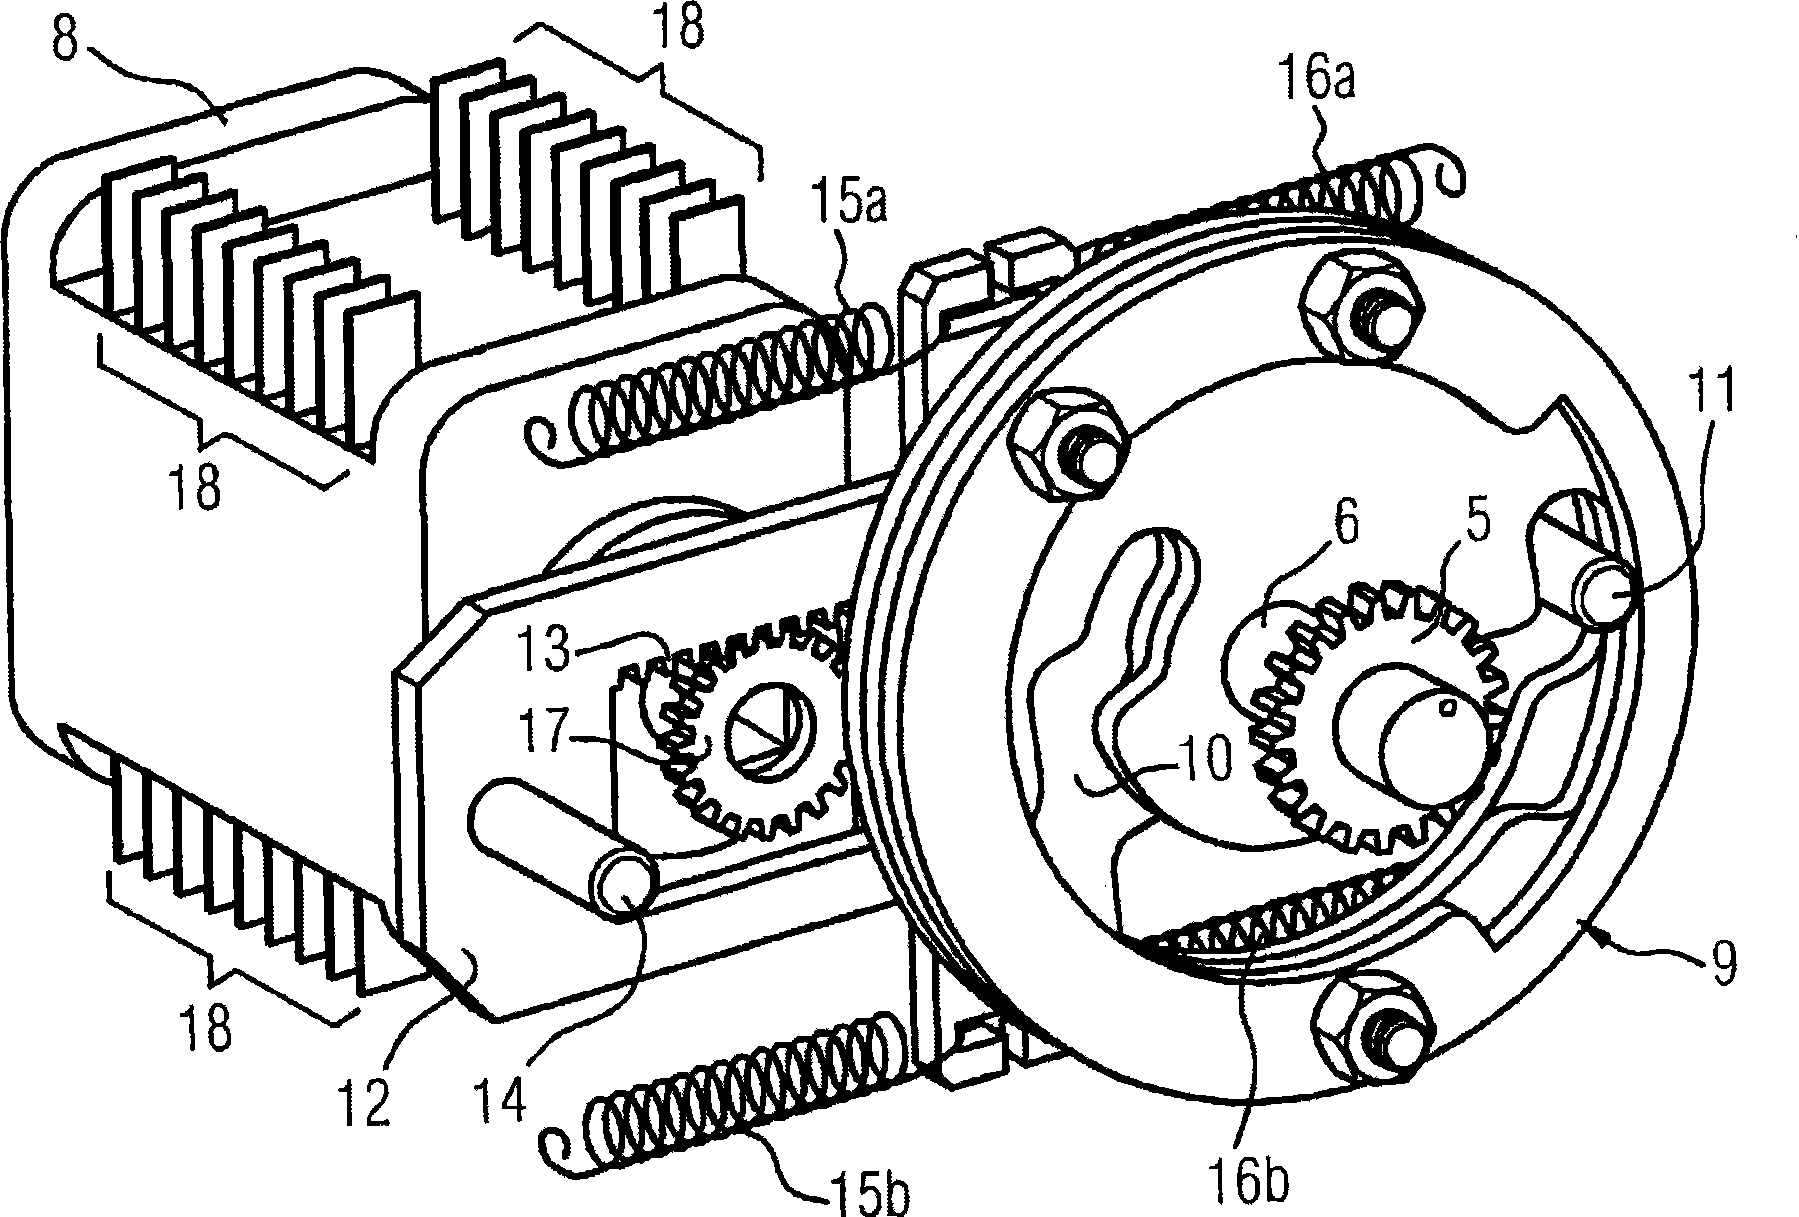 Gear assembly for driving an electrical switching contact